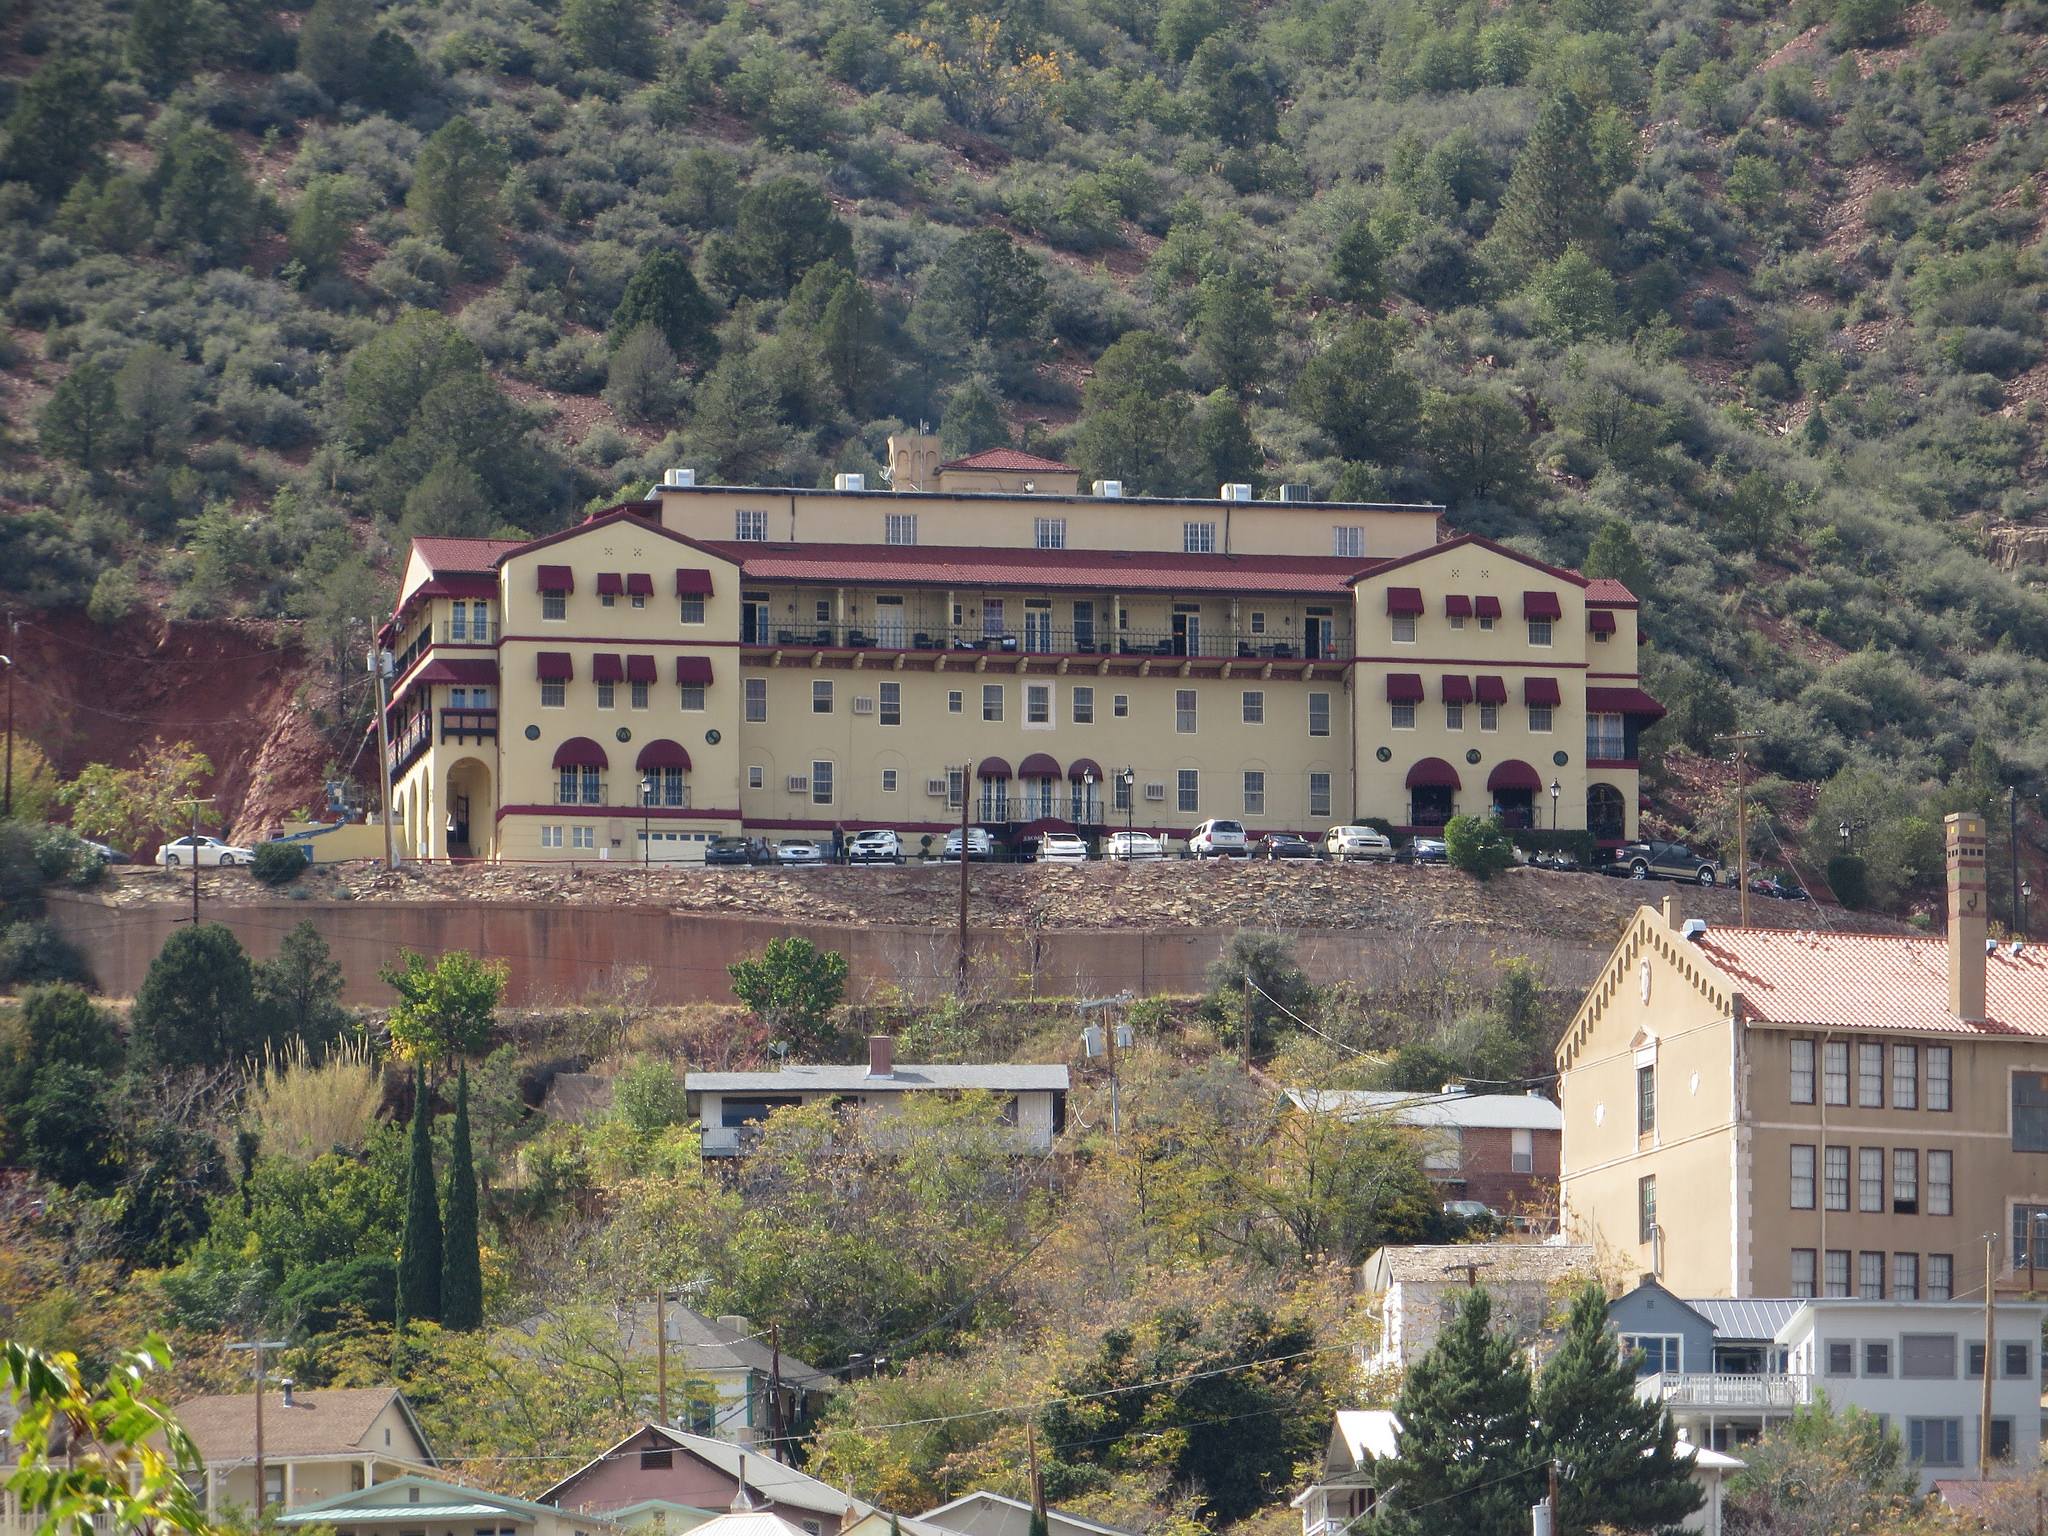 The Story Behind This Haunted Arizona Hotel Is Seriously Creepy